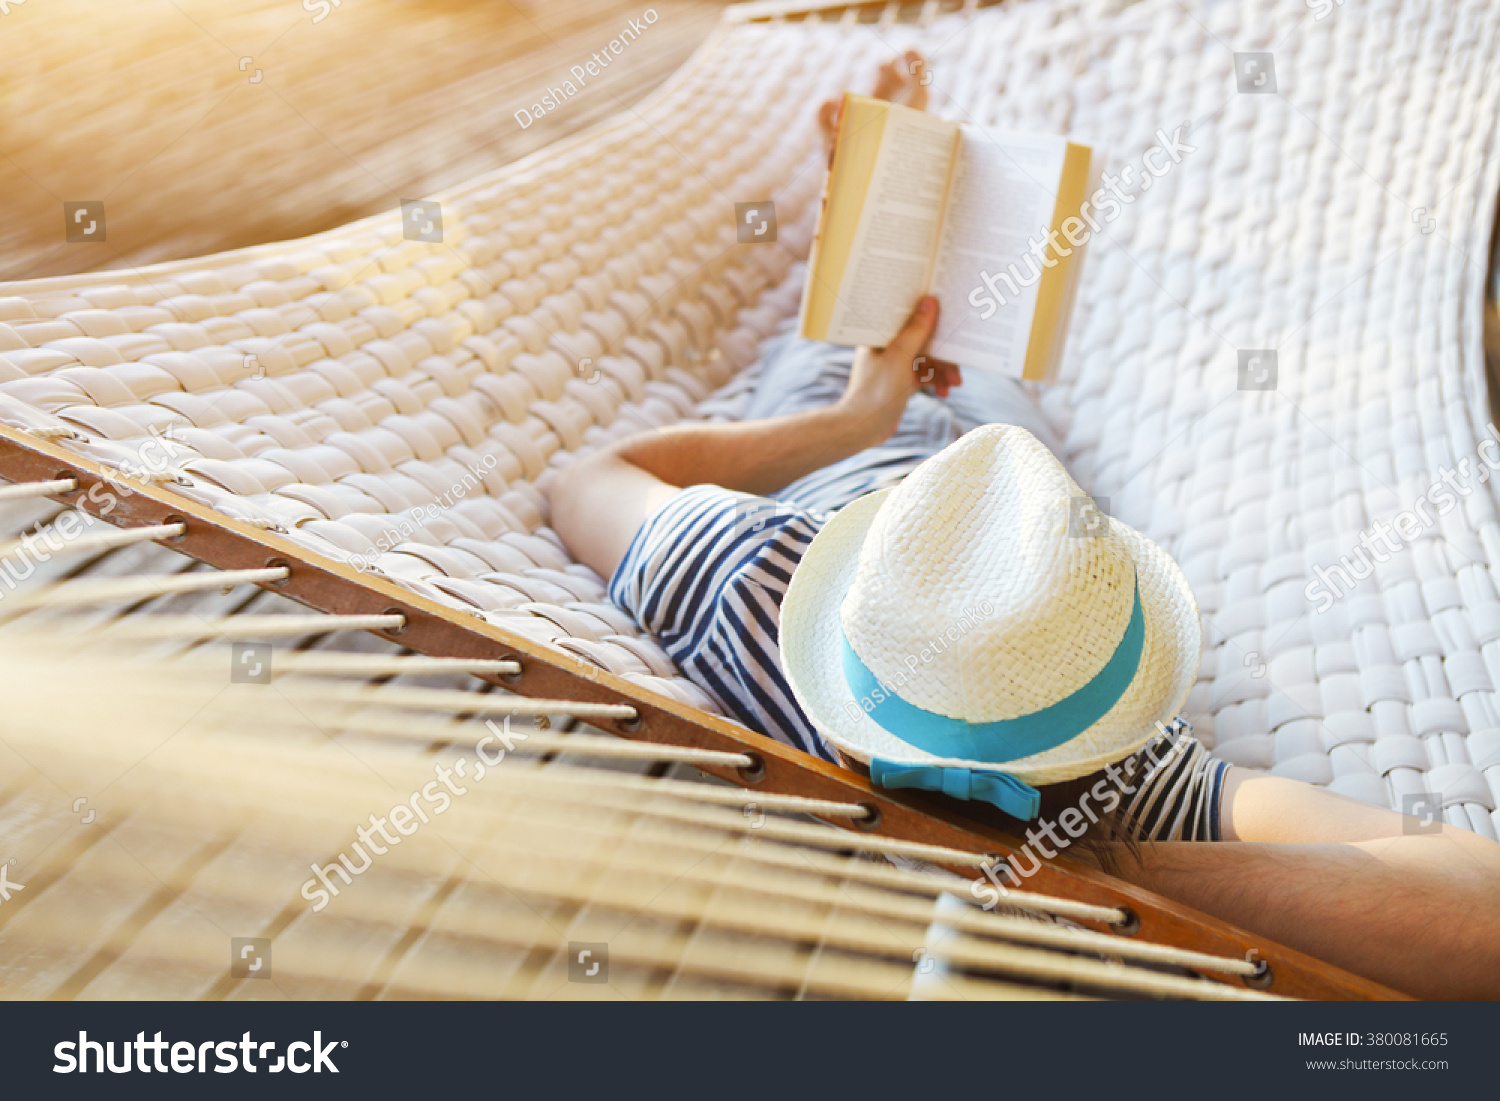 Lazy time. Man in hat in a hammock with book on a summer day #380081665